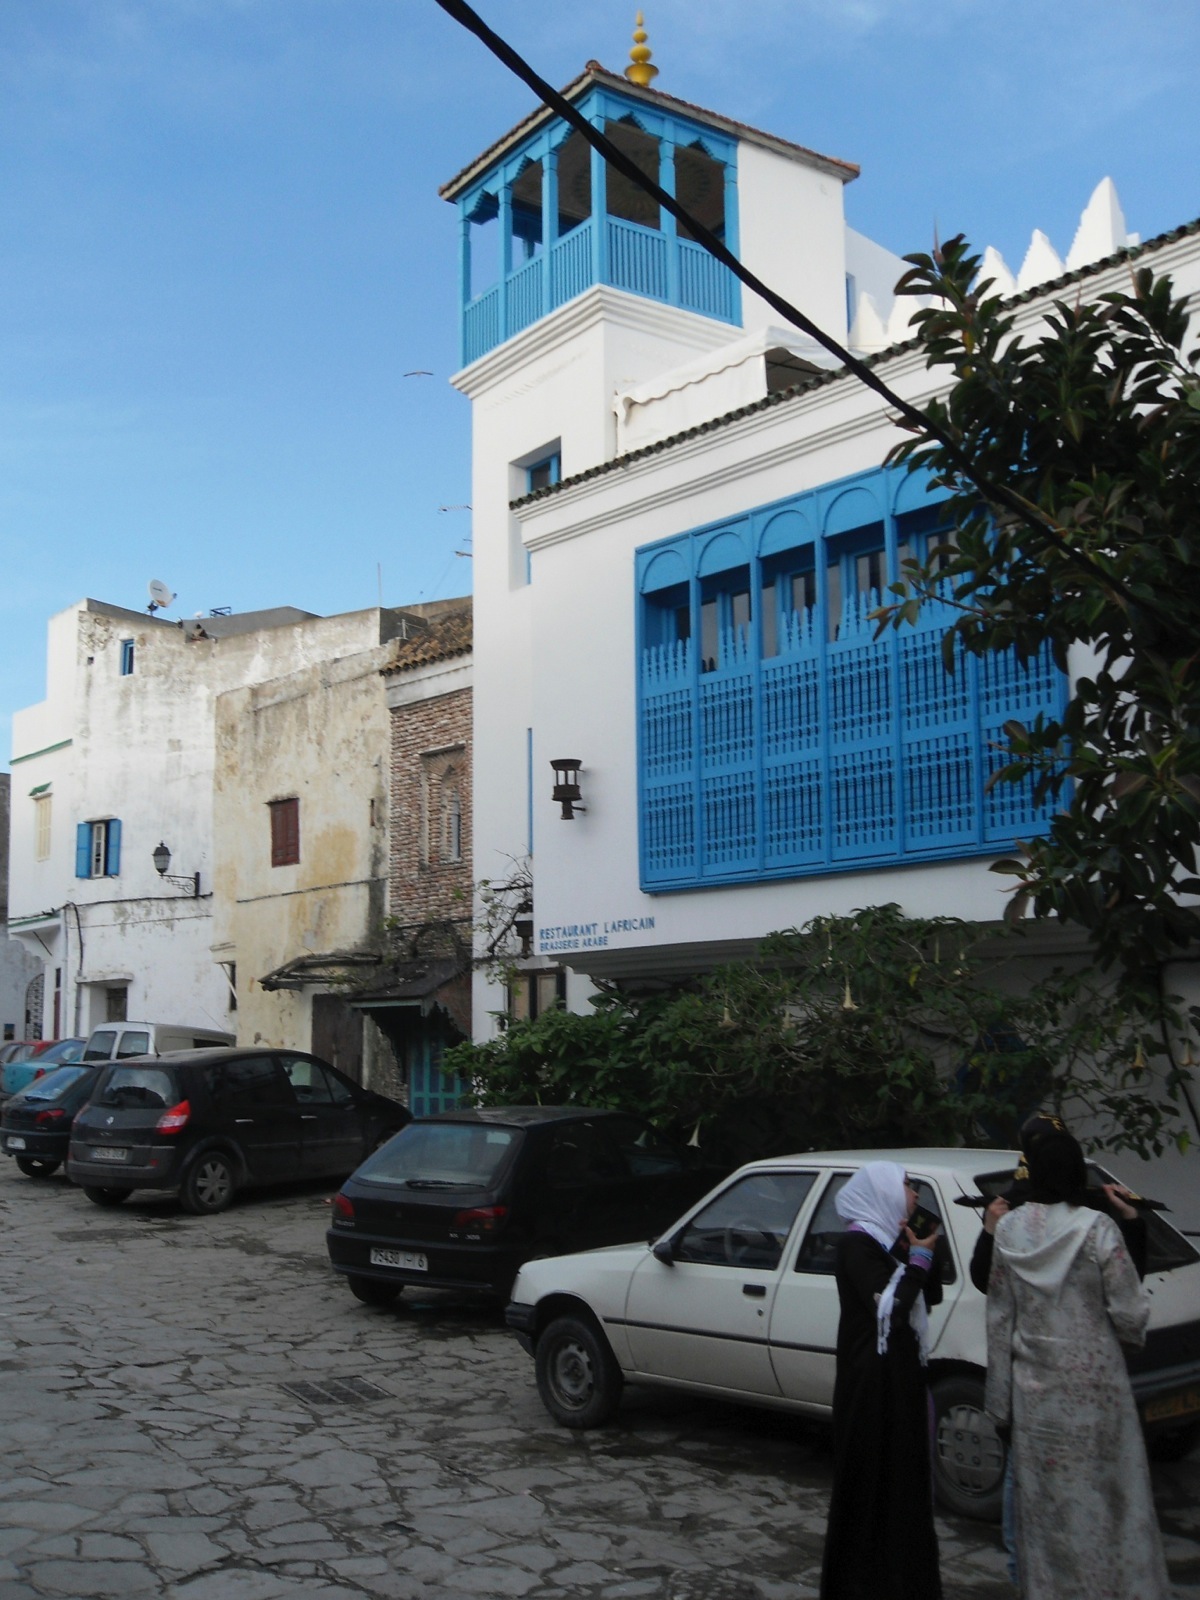 Parking outside the west Casbah gate